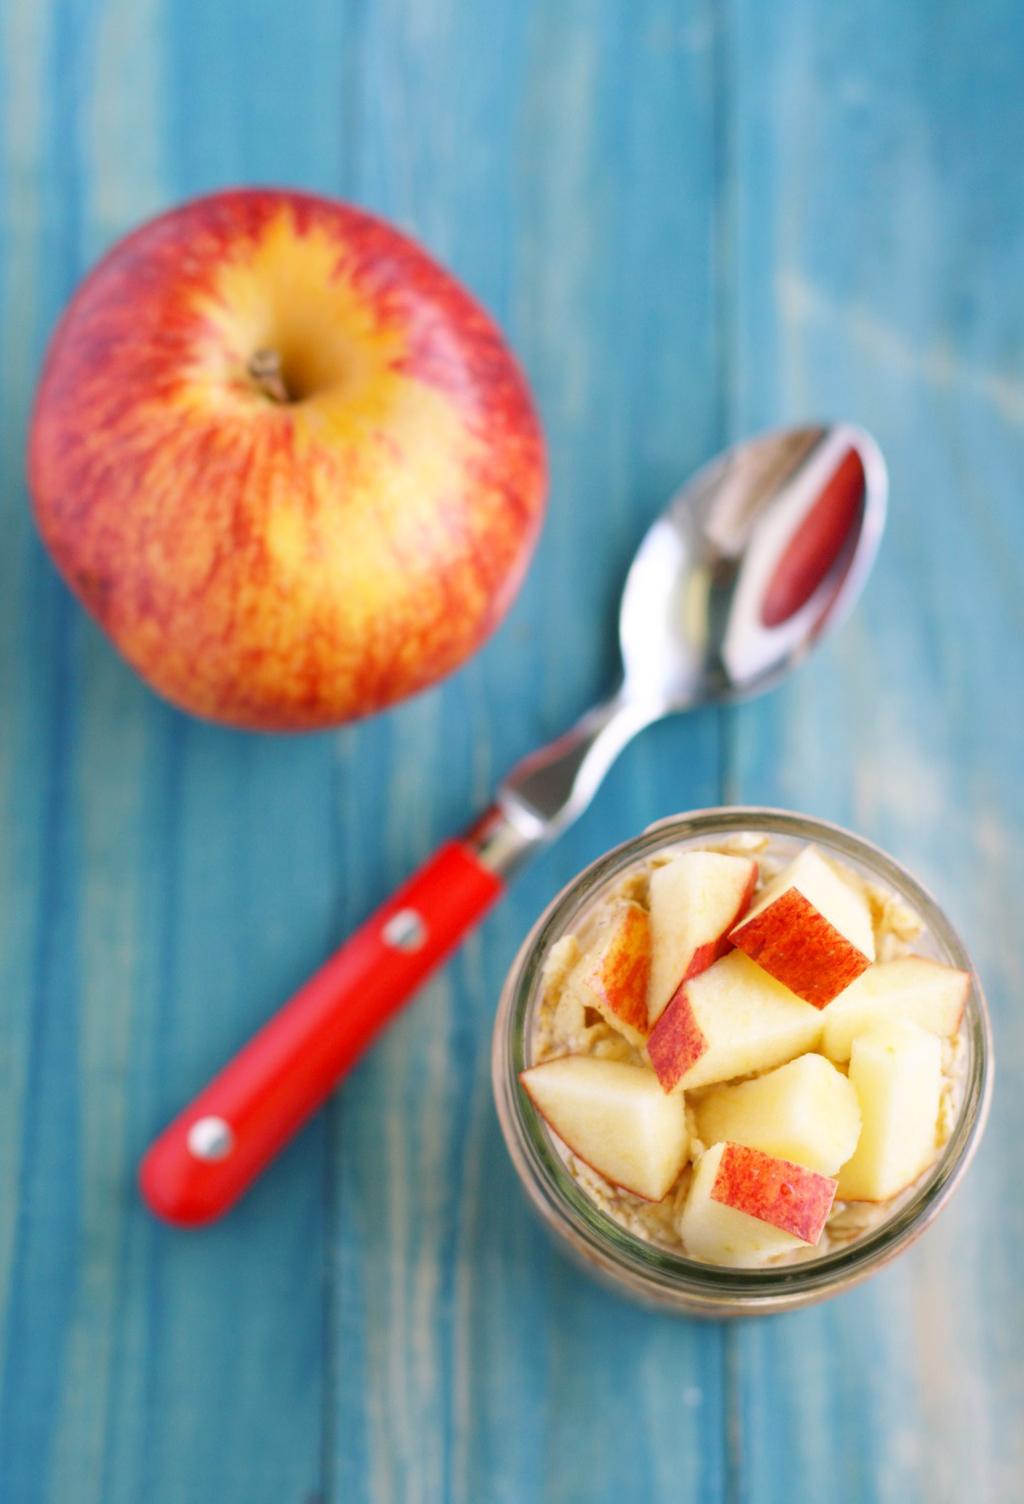 Apple Cinnamon Overnight Oats 2/3 cup gluten free oats 3/4 cup unsweetened coconut milk (or non-dairy milk of your choice) 1 Tablespoon maple syrup ½ teaspoon cinnamon Pinch of salt ¼ cup diced apple